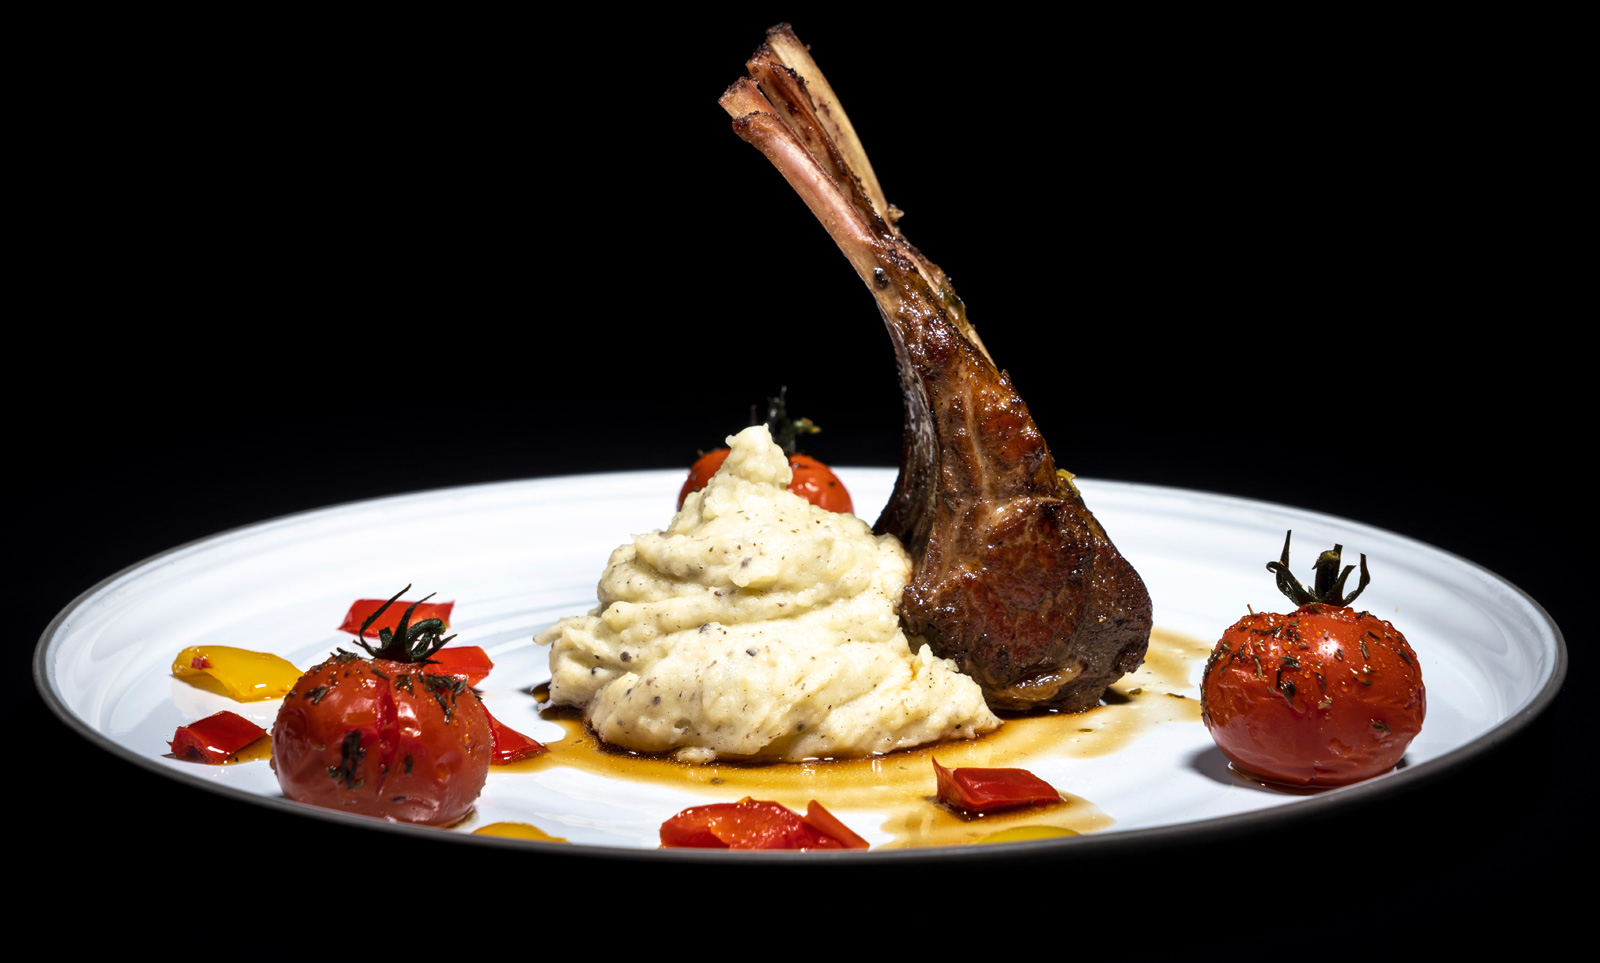 restaurant specialities from the Dordogne and Basque Country regions